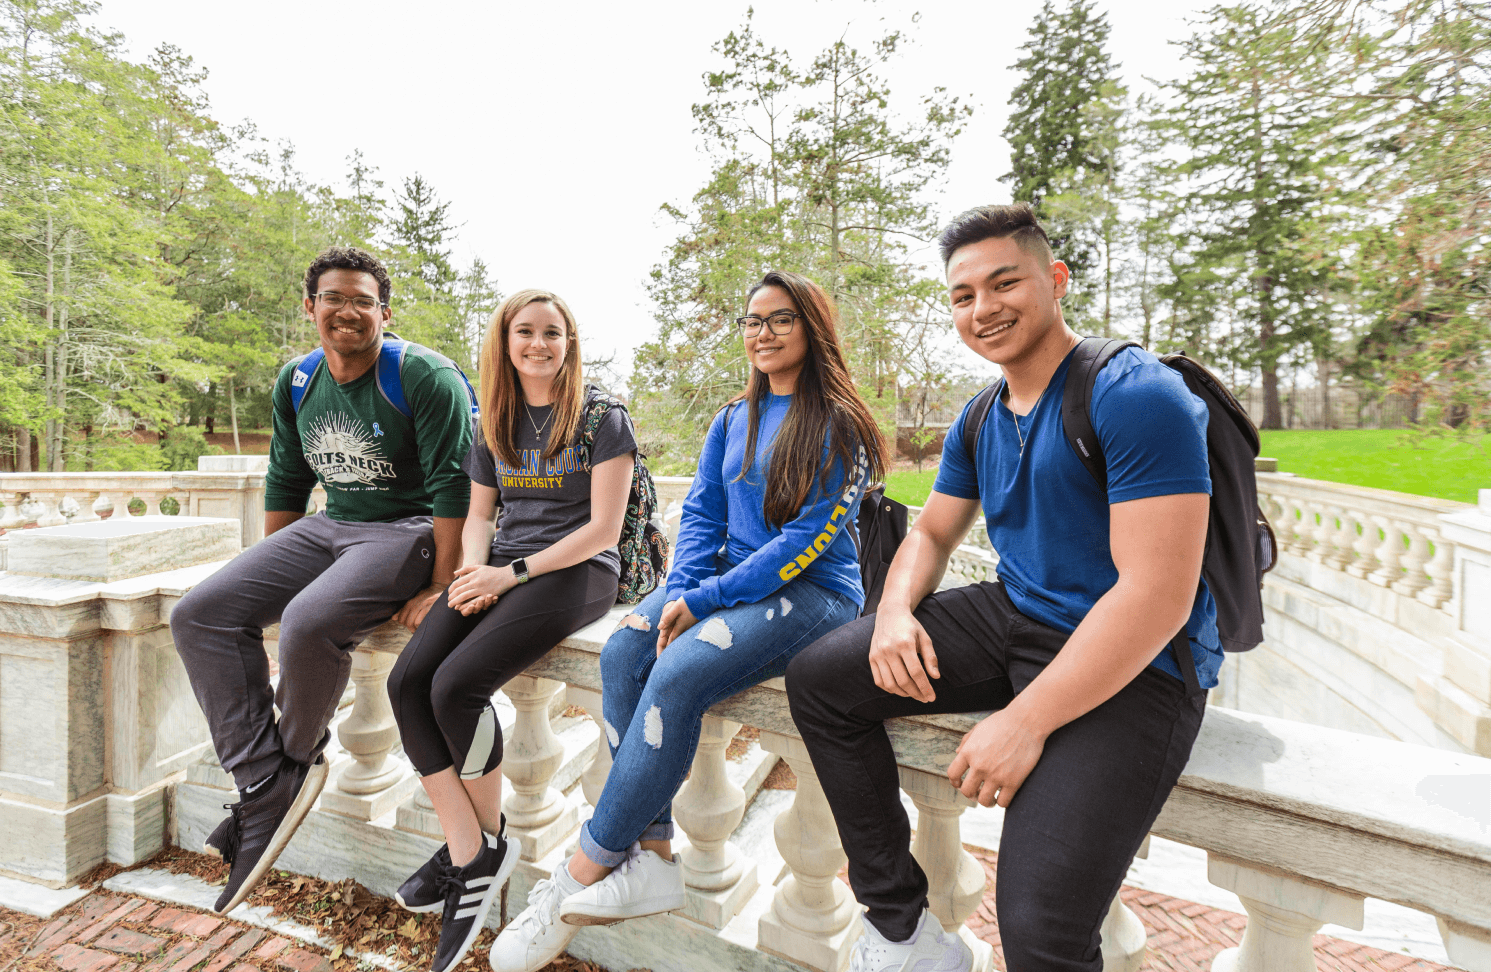 Group of students sitting outside smiling together